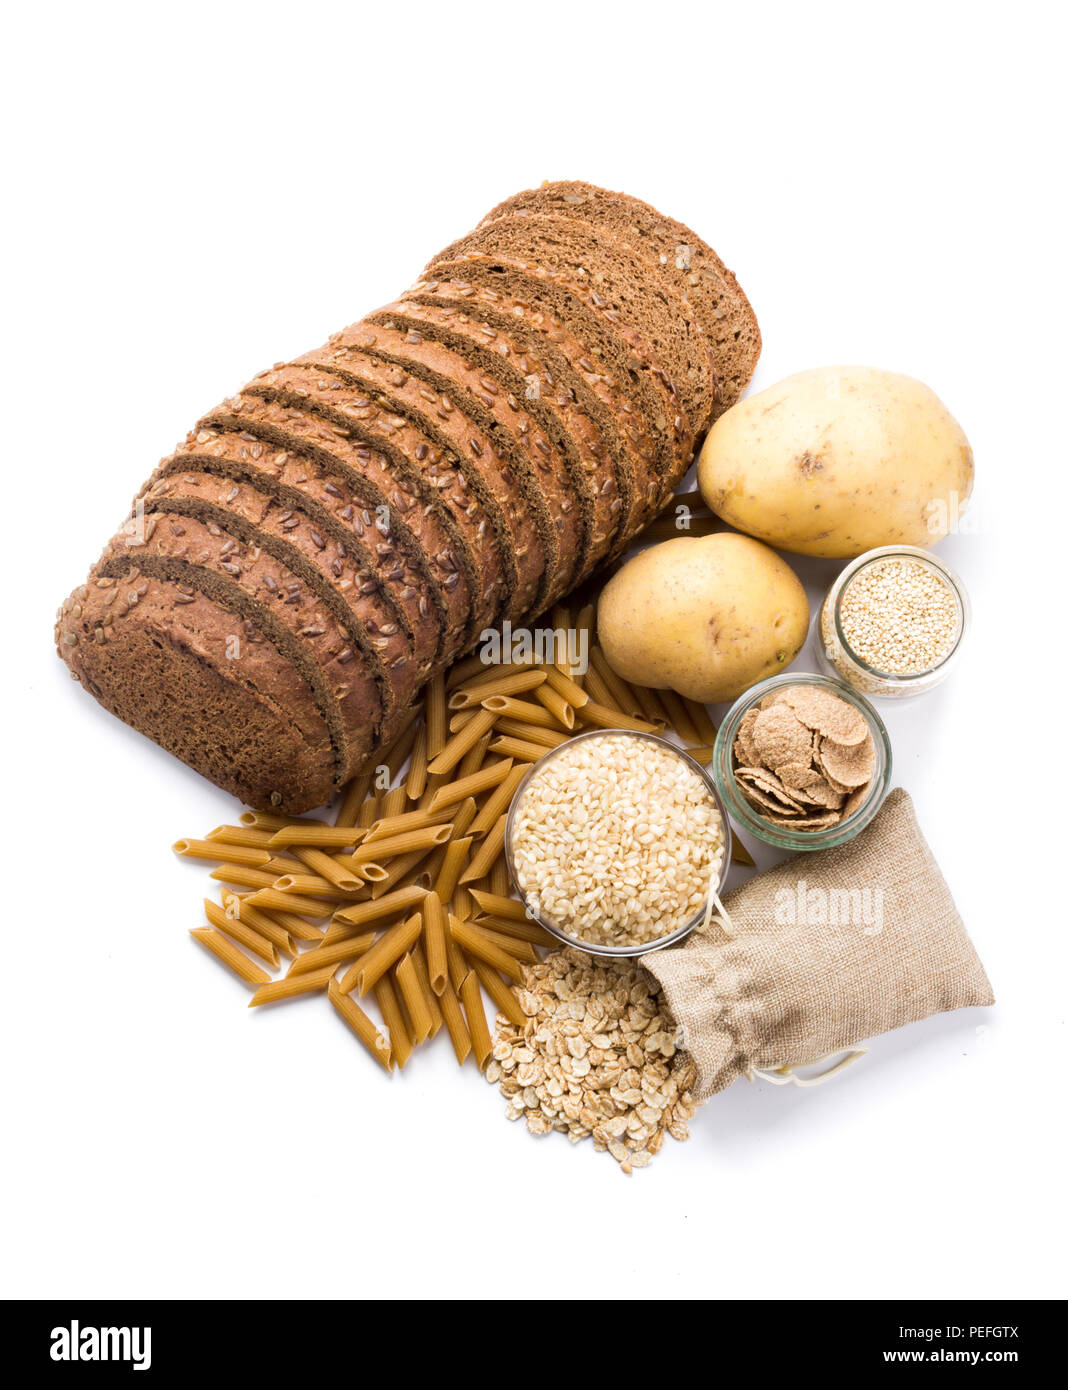 Group of whole foods, complex carbohydrates isolated on a white background Stock Photo